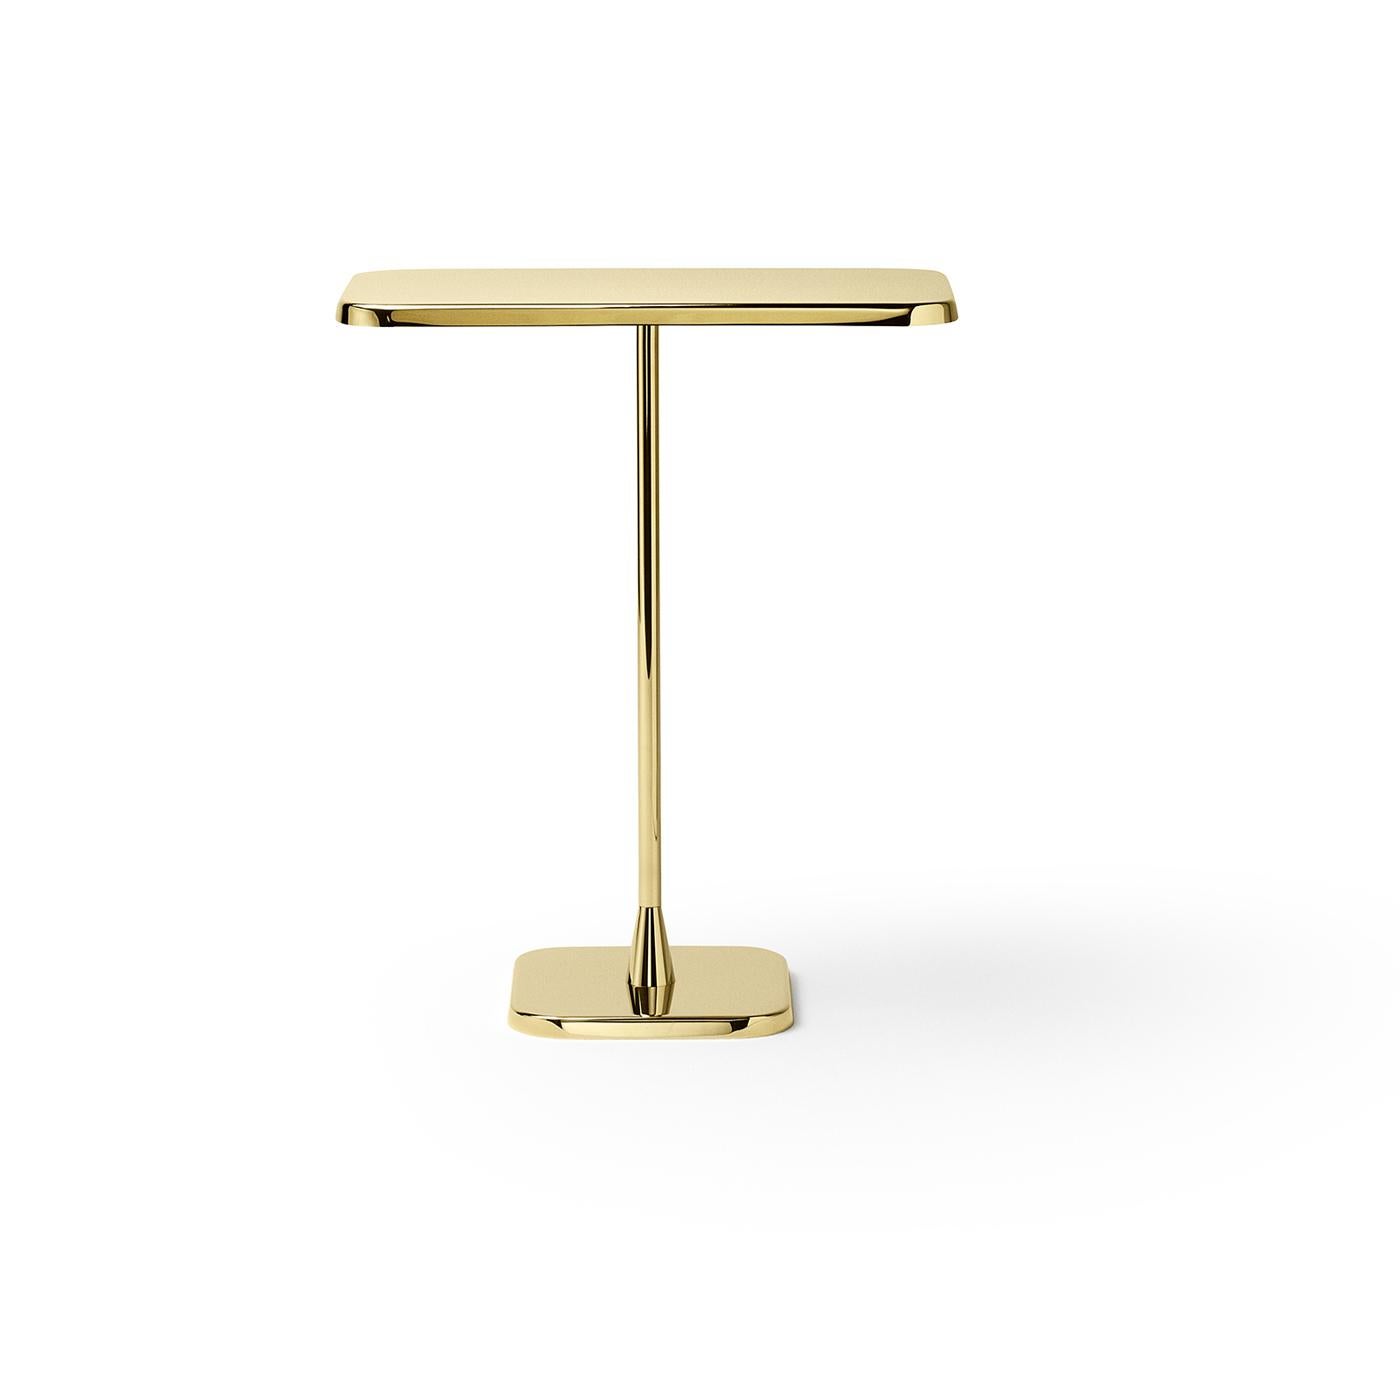 This elegant rectangular table in stainless steel was designed by Richard Hutten for the Dutch National Opera and Ballet House. This piece features a PVD coating that guarantees no change in color or corrosion for 25 years.
 